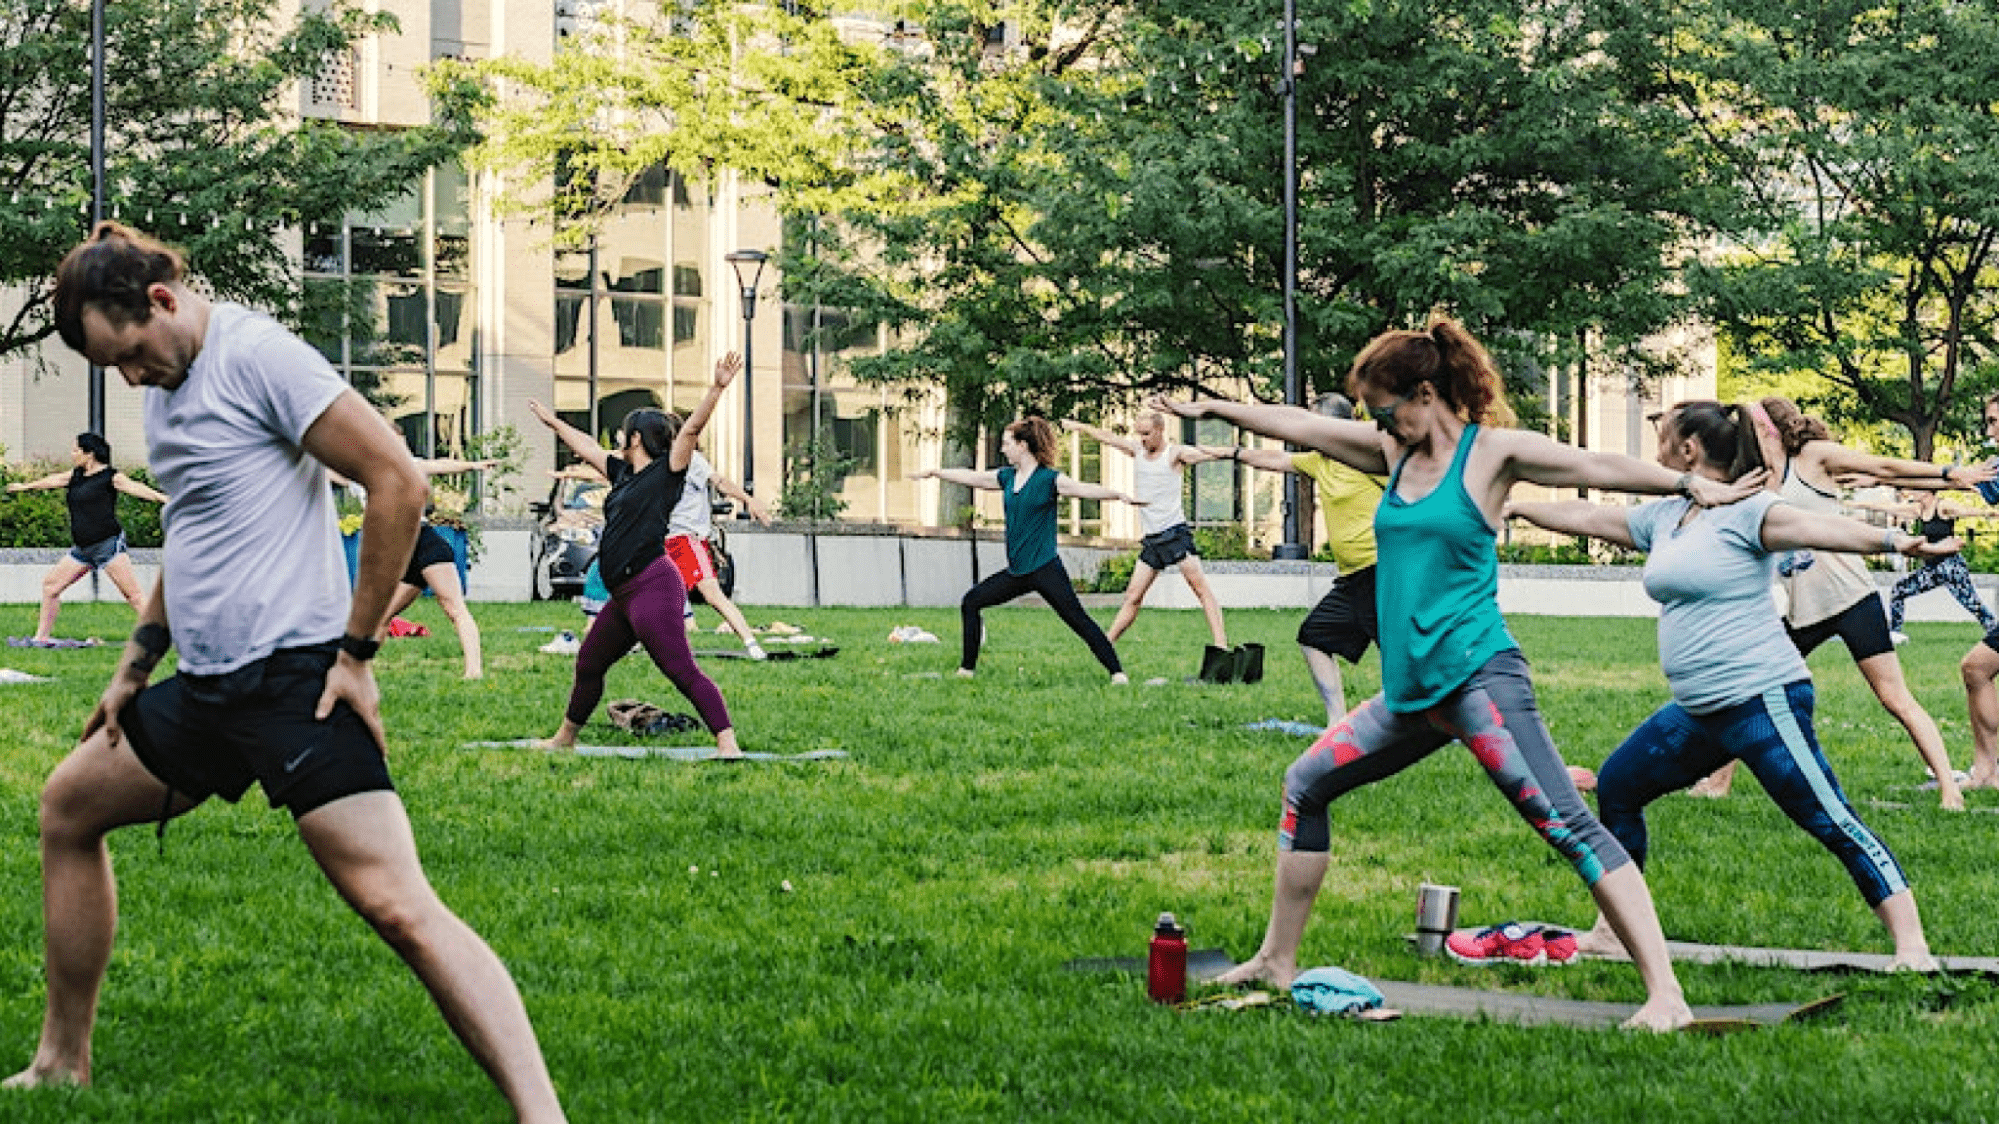 Event attendees practicing yoga in the park